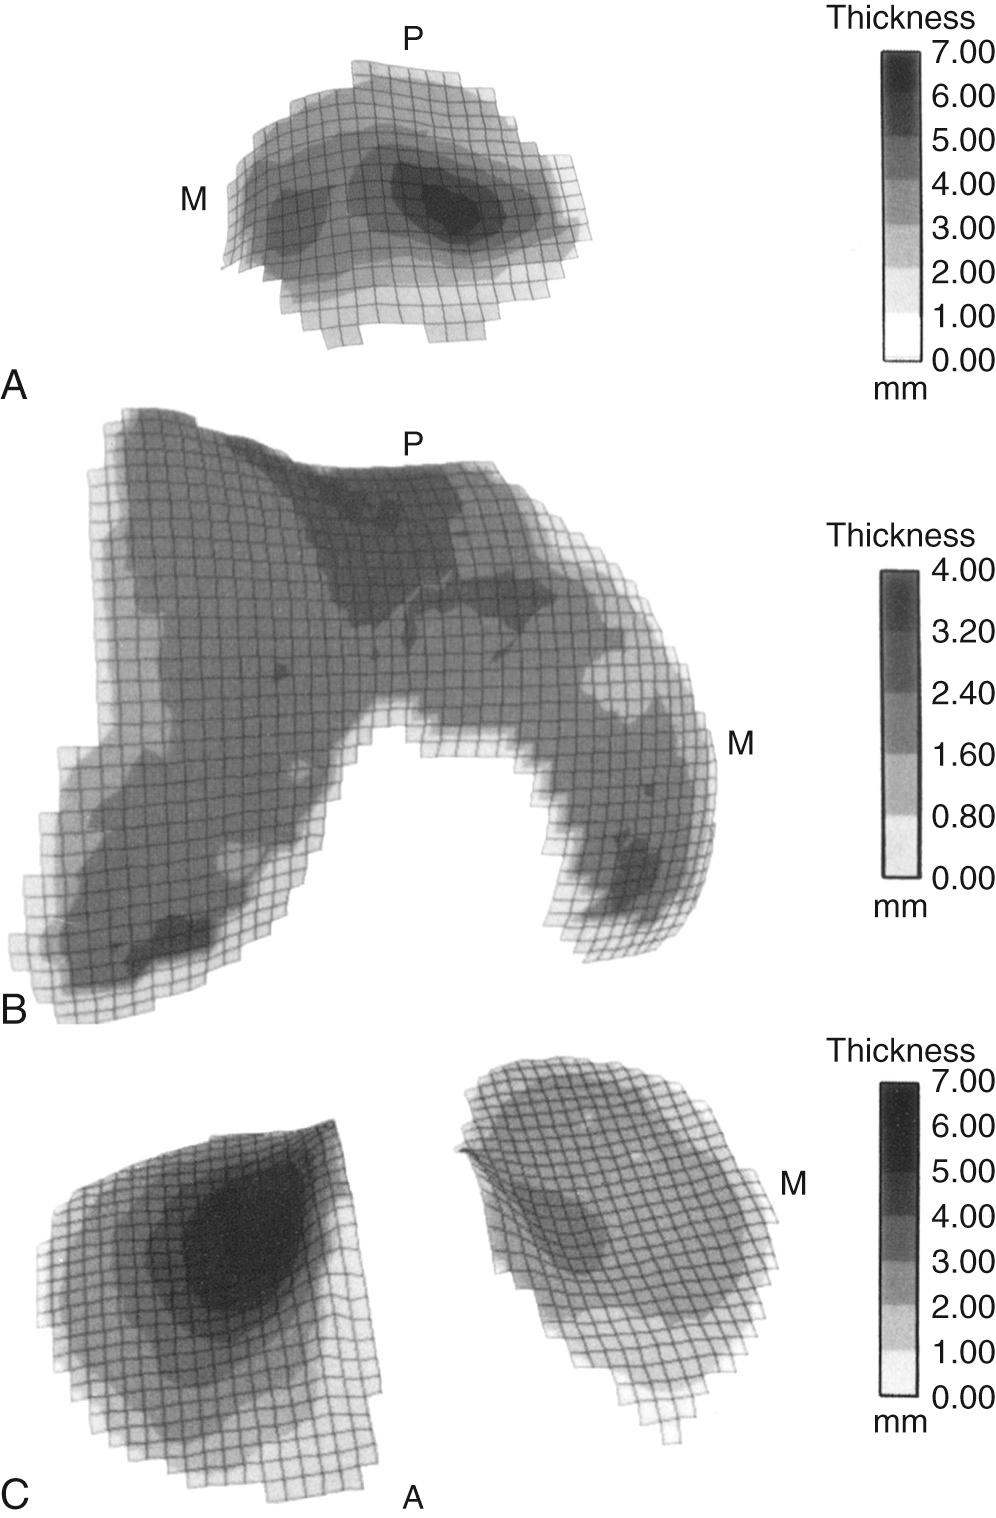 FIG 30.1, Grayscale of cartilage thickness superimposed on the topographic map of (A) patellar, (B) femoral, and (C) tibial articular surfaces. A, Anterior; M , medial; P, proximal.